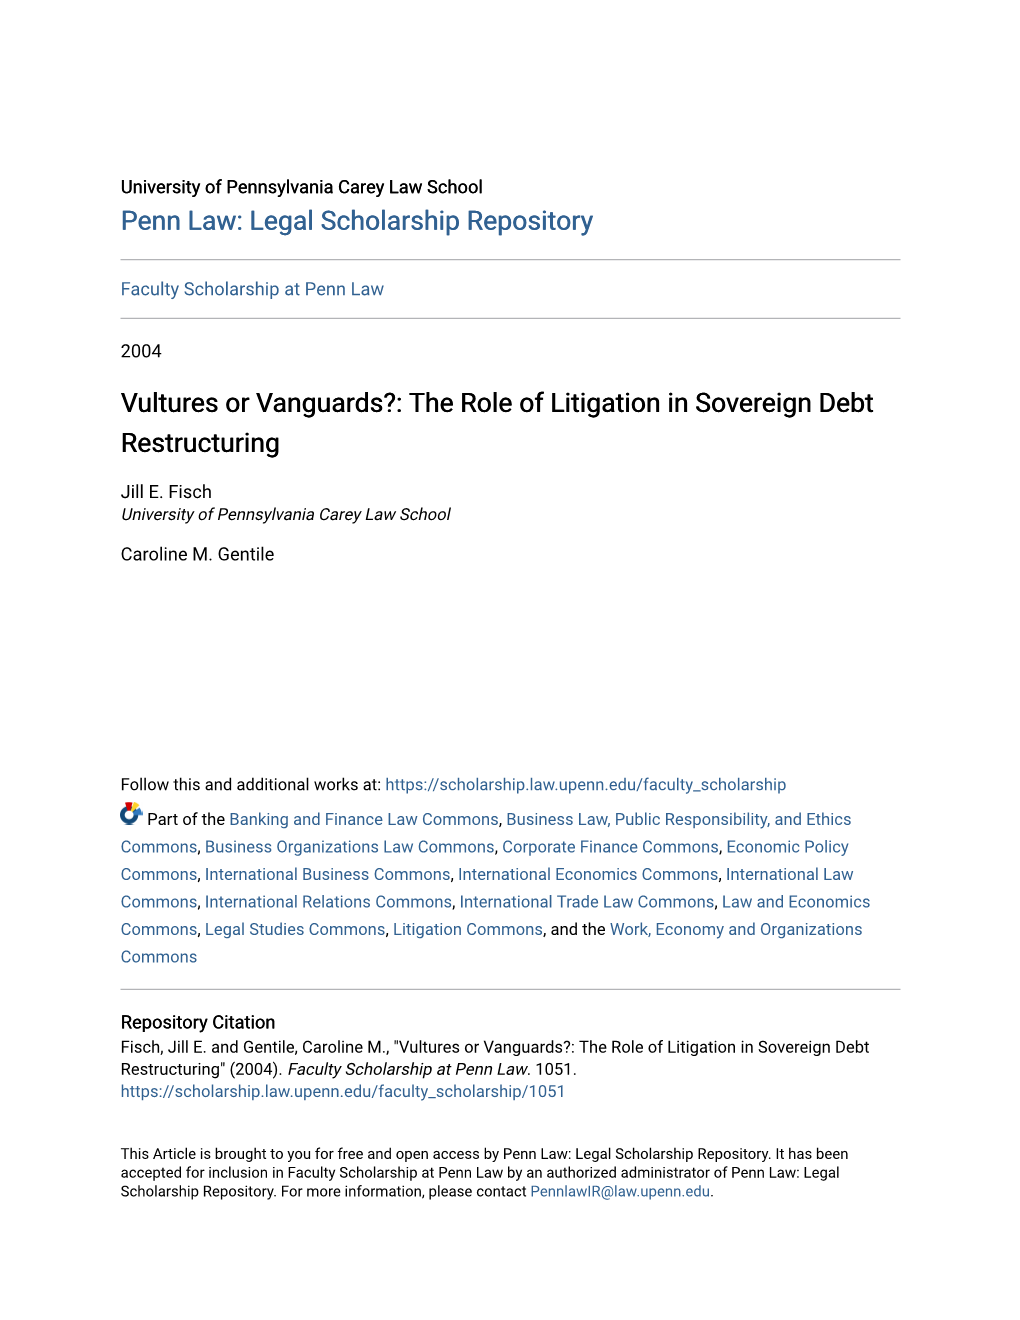 The Role of Litigation in Sovereign Debt Restructuring